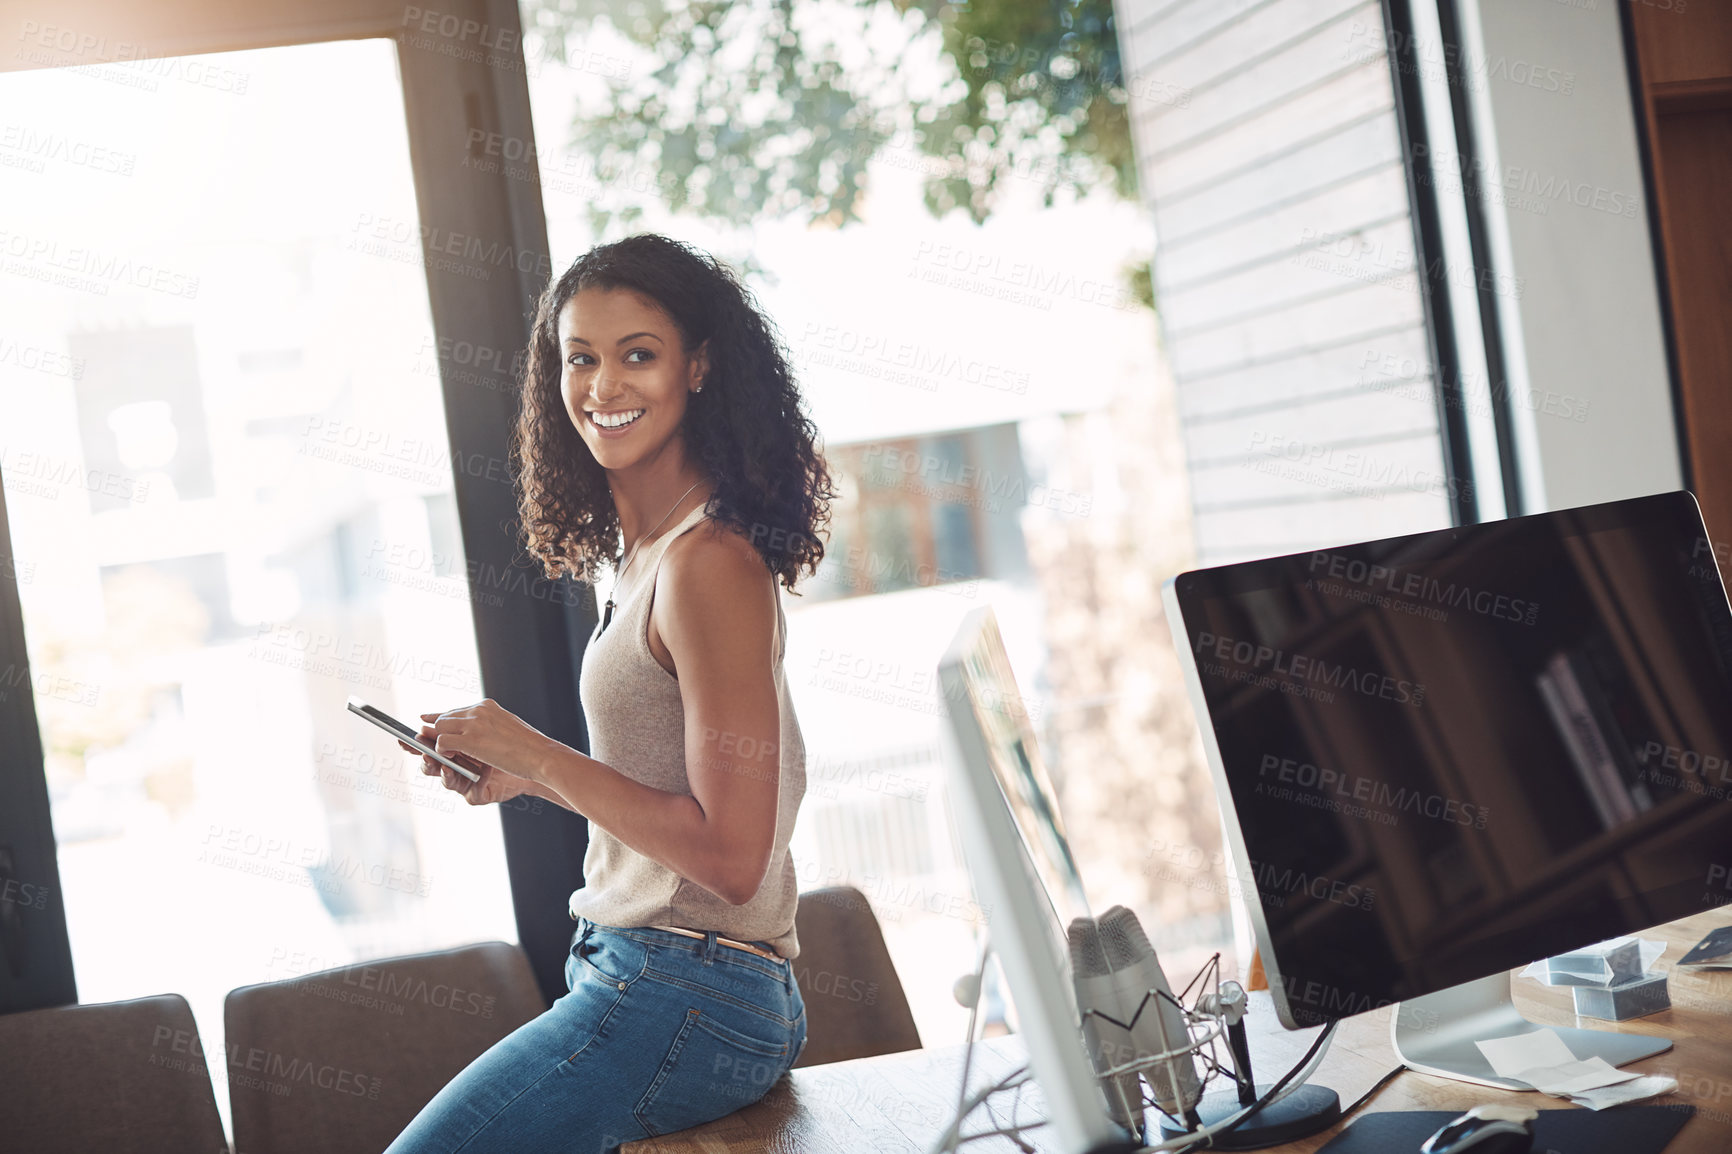 Buy stock photo Casual female holding a phone in a home office enjoying working remote sitting on her desk. Candid, real and authentic moment of digital marketing worker. Smiling woman taking a break on social media